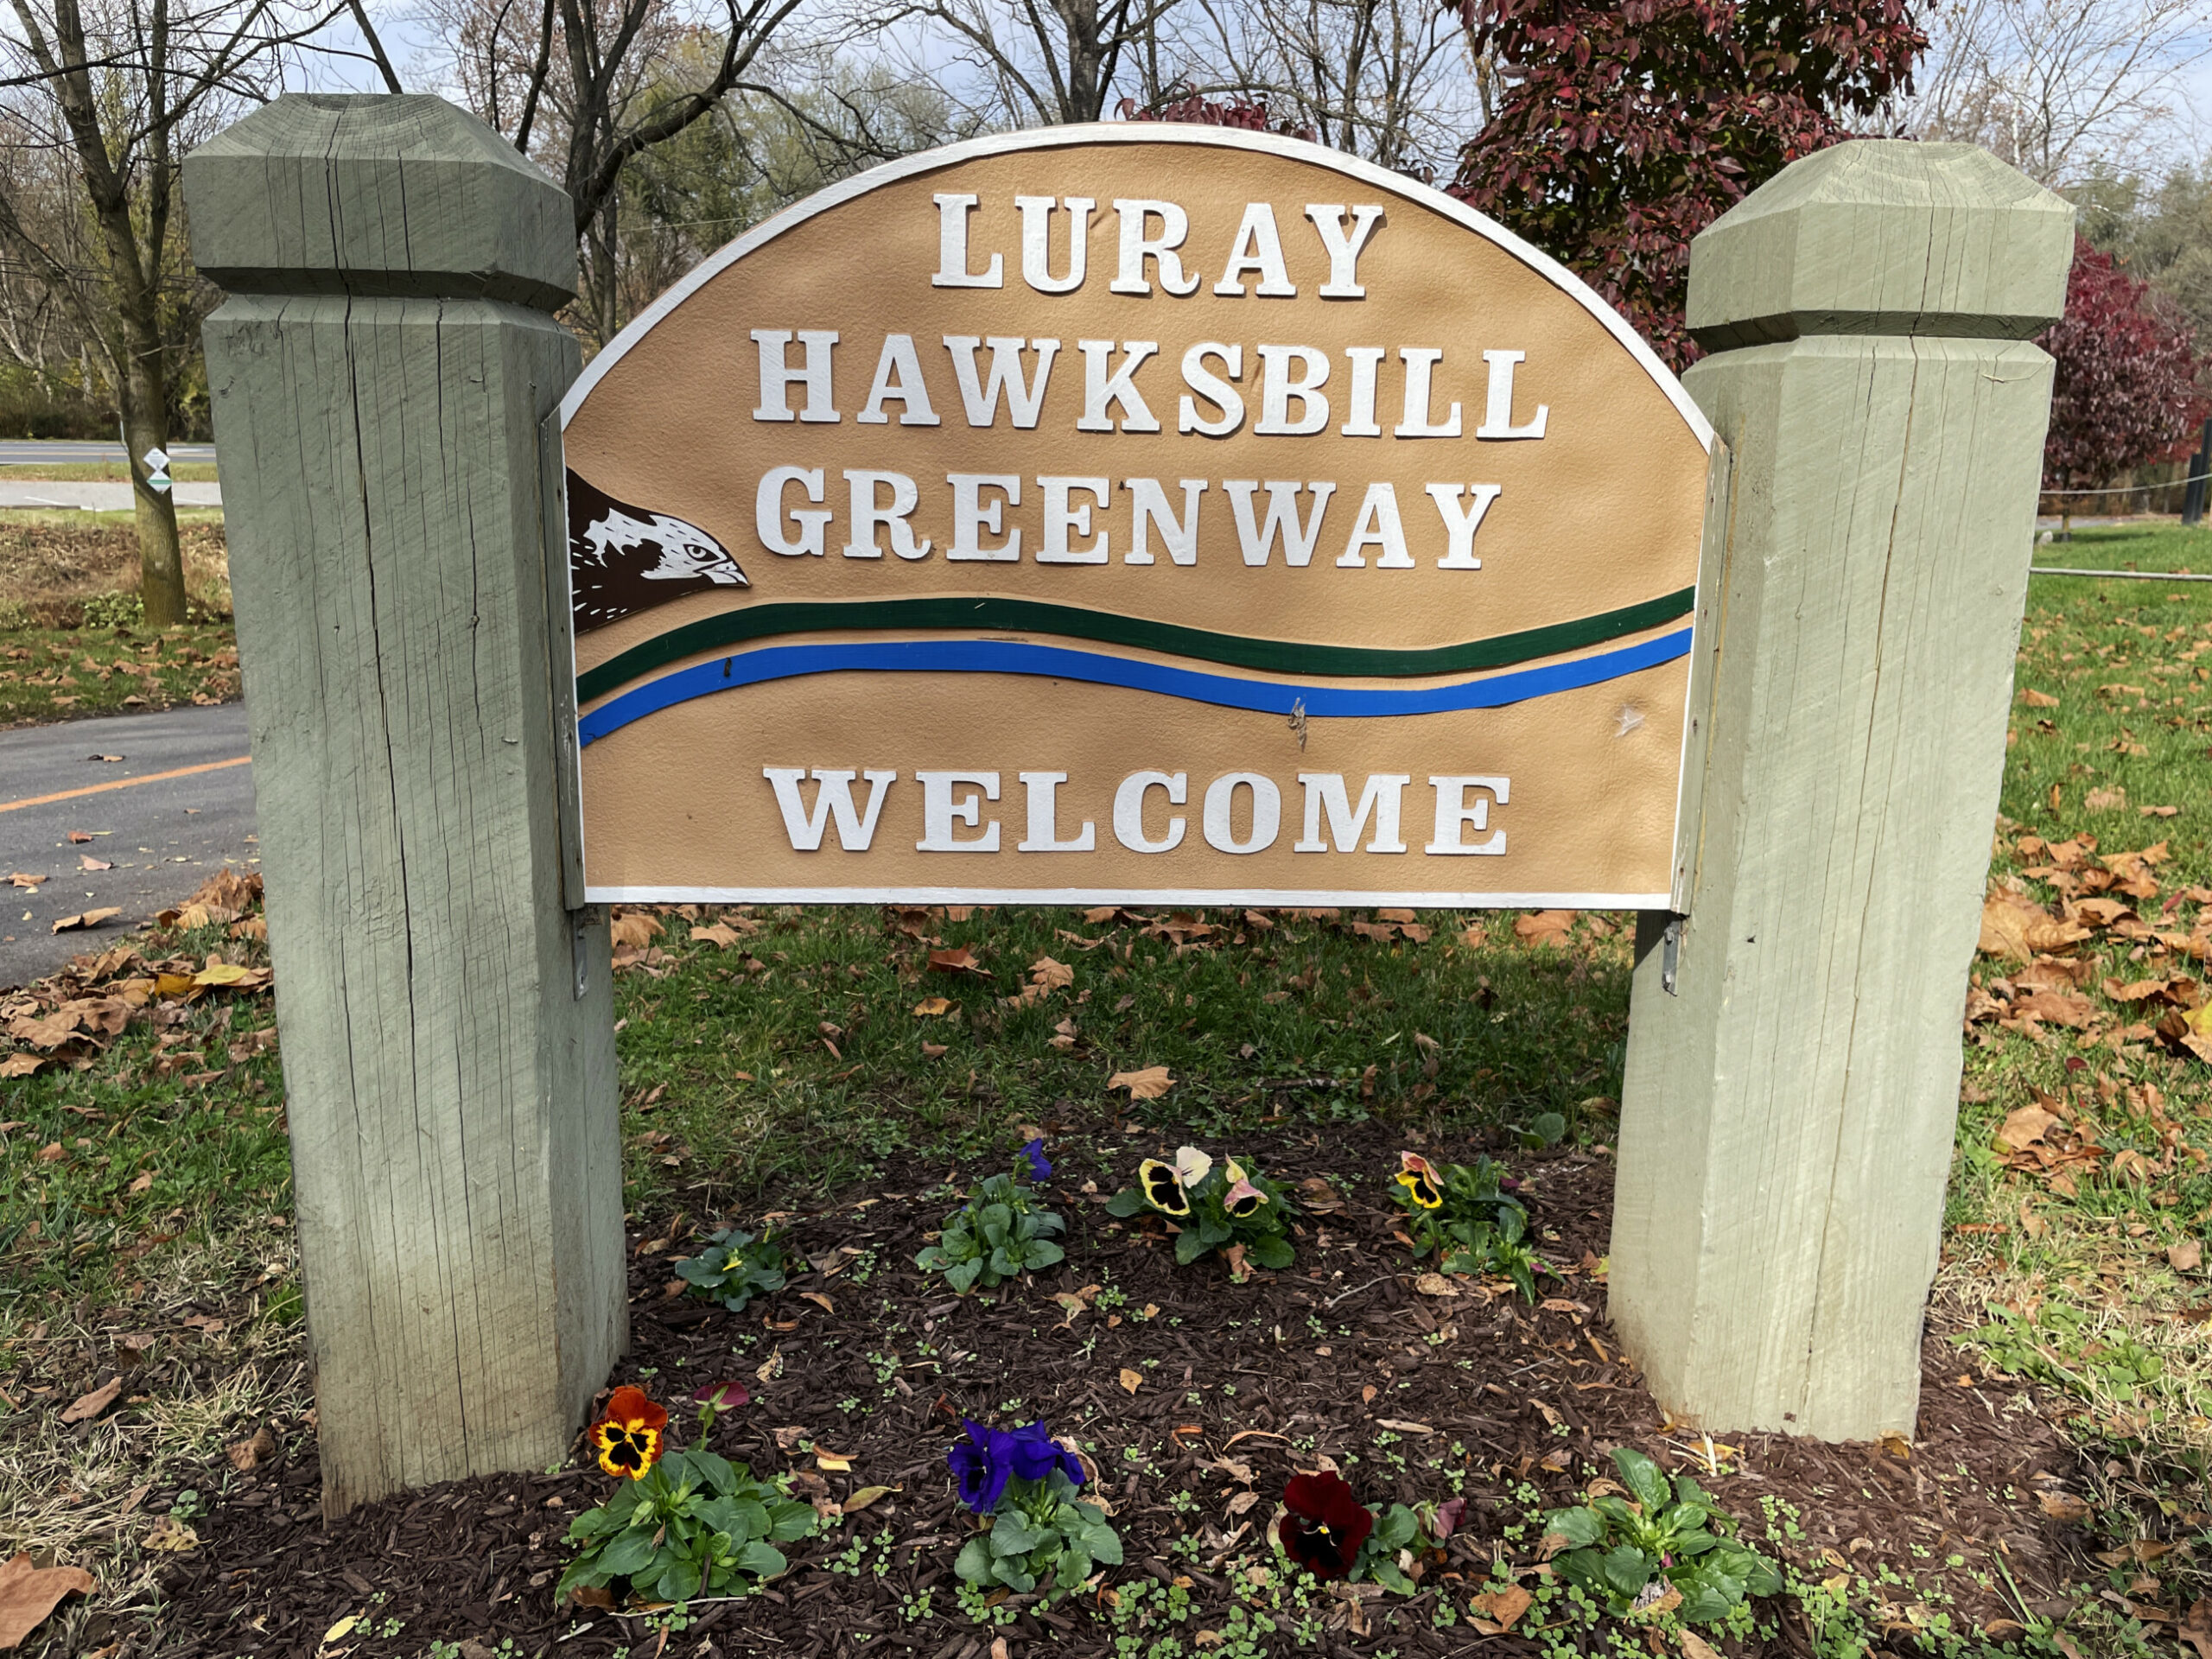 Wooden greenway welcome sign between two concrete posts with pansies planted underneath and a paved path in the background.